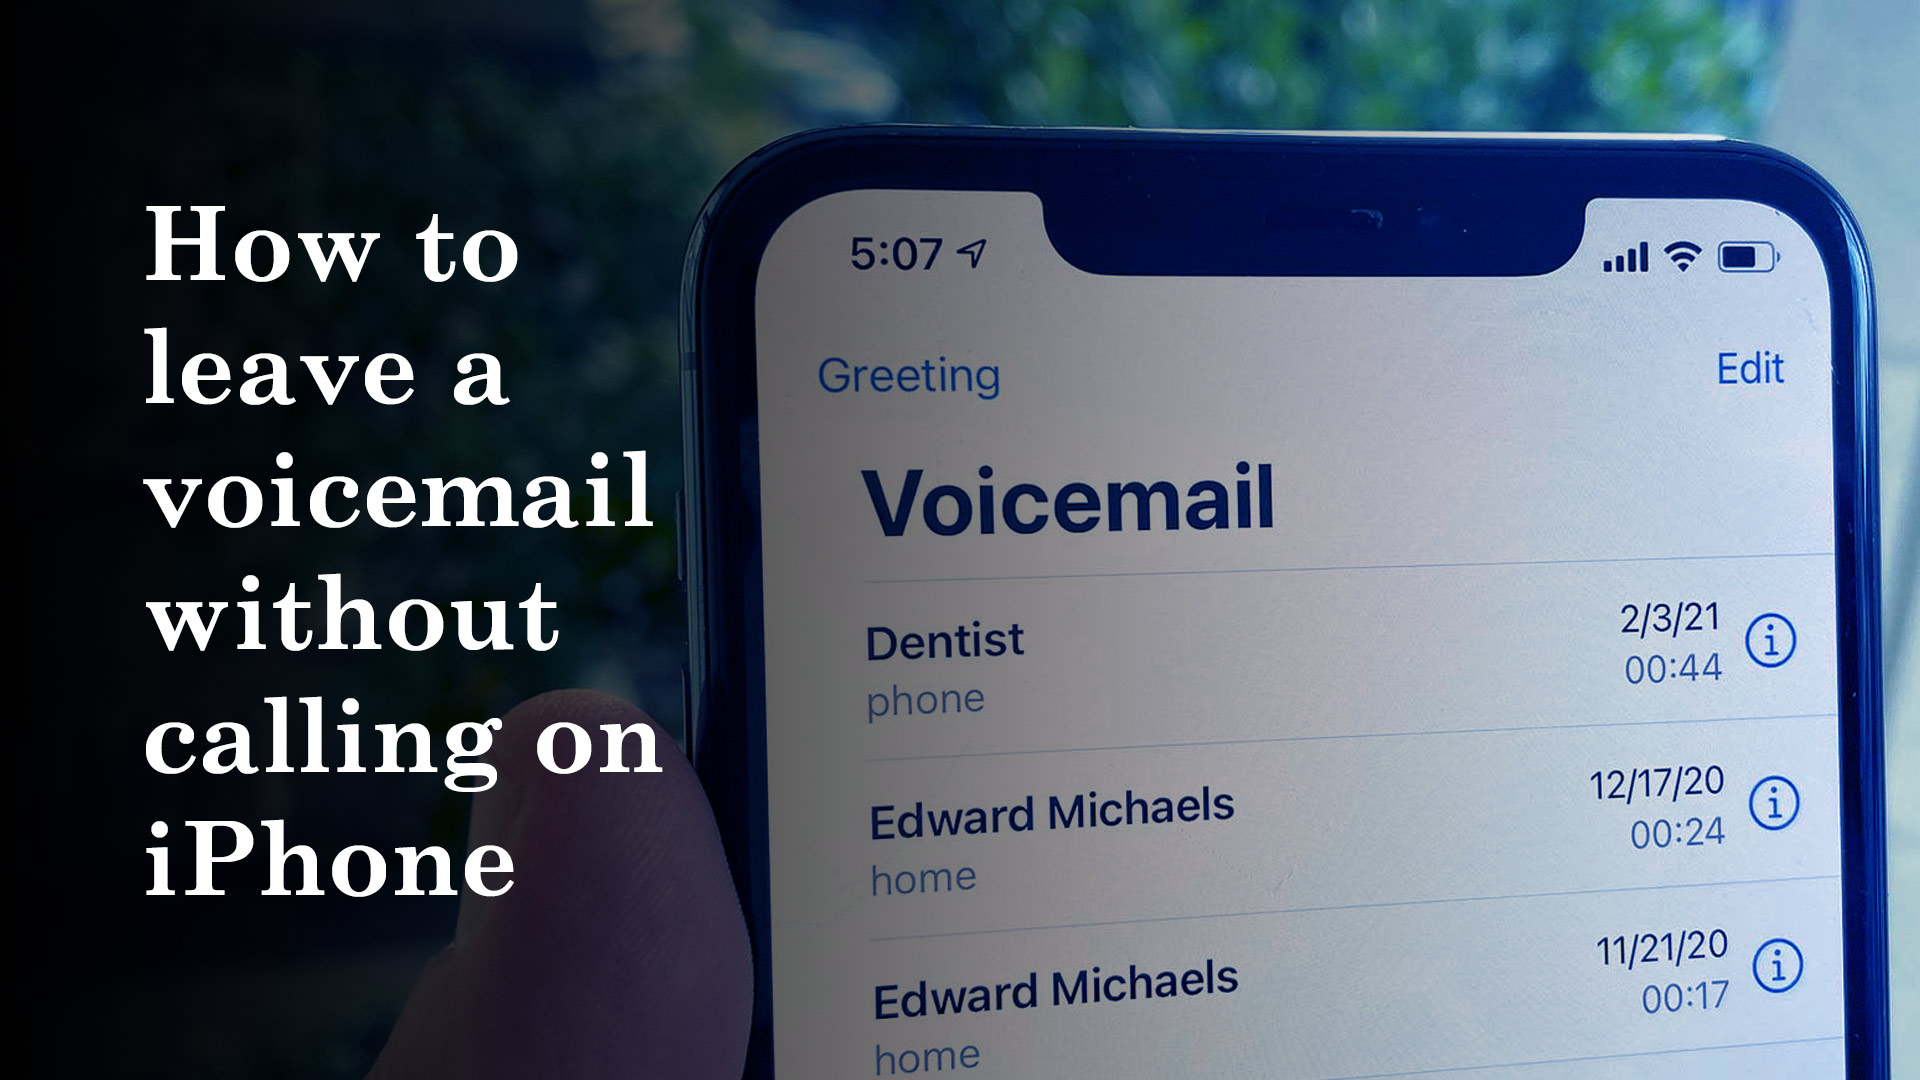 How to leave a voicemail without calling on iPhone